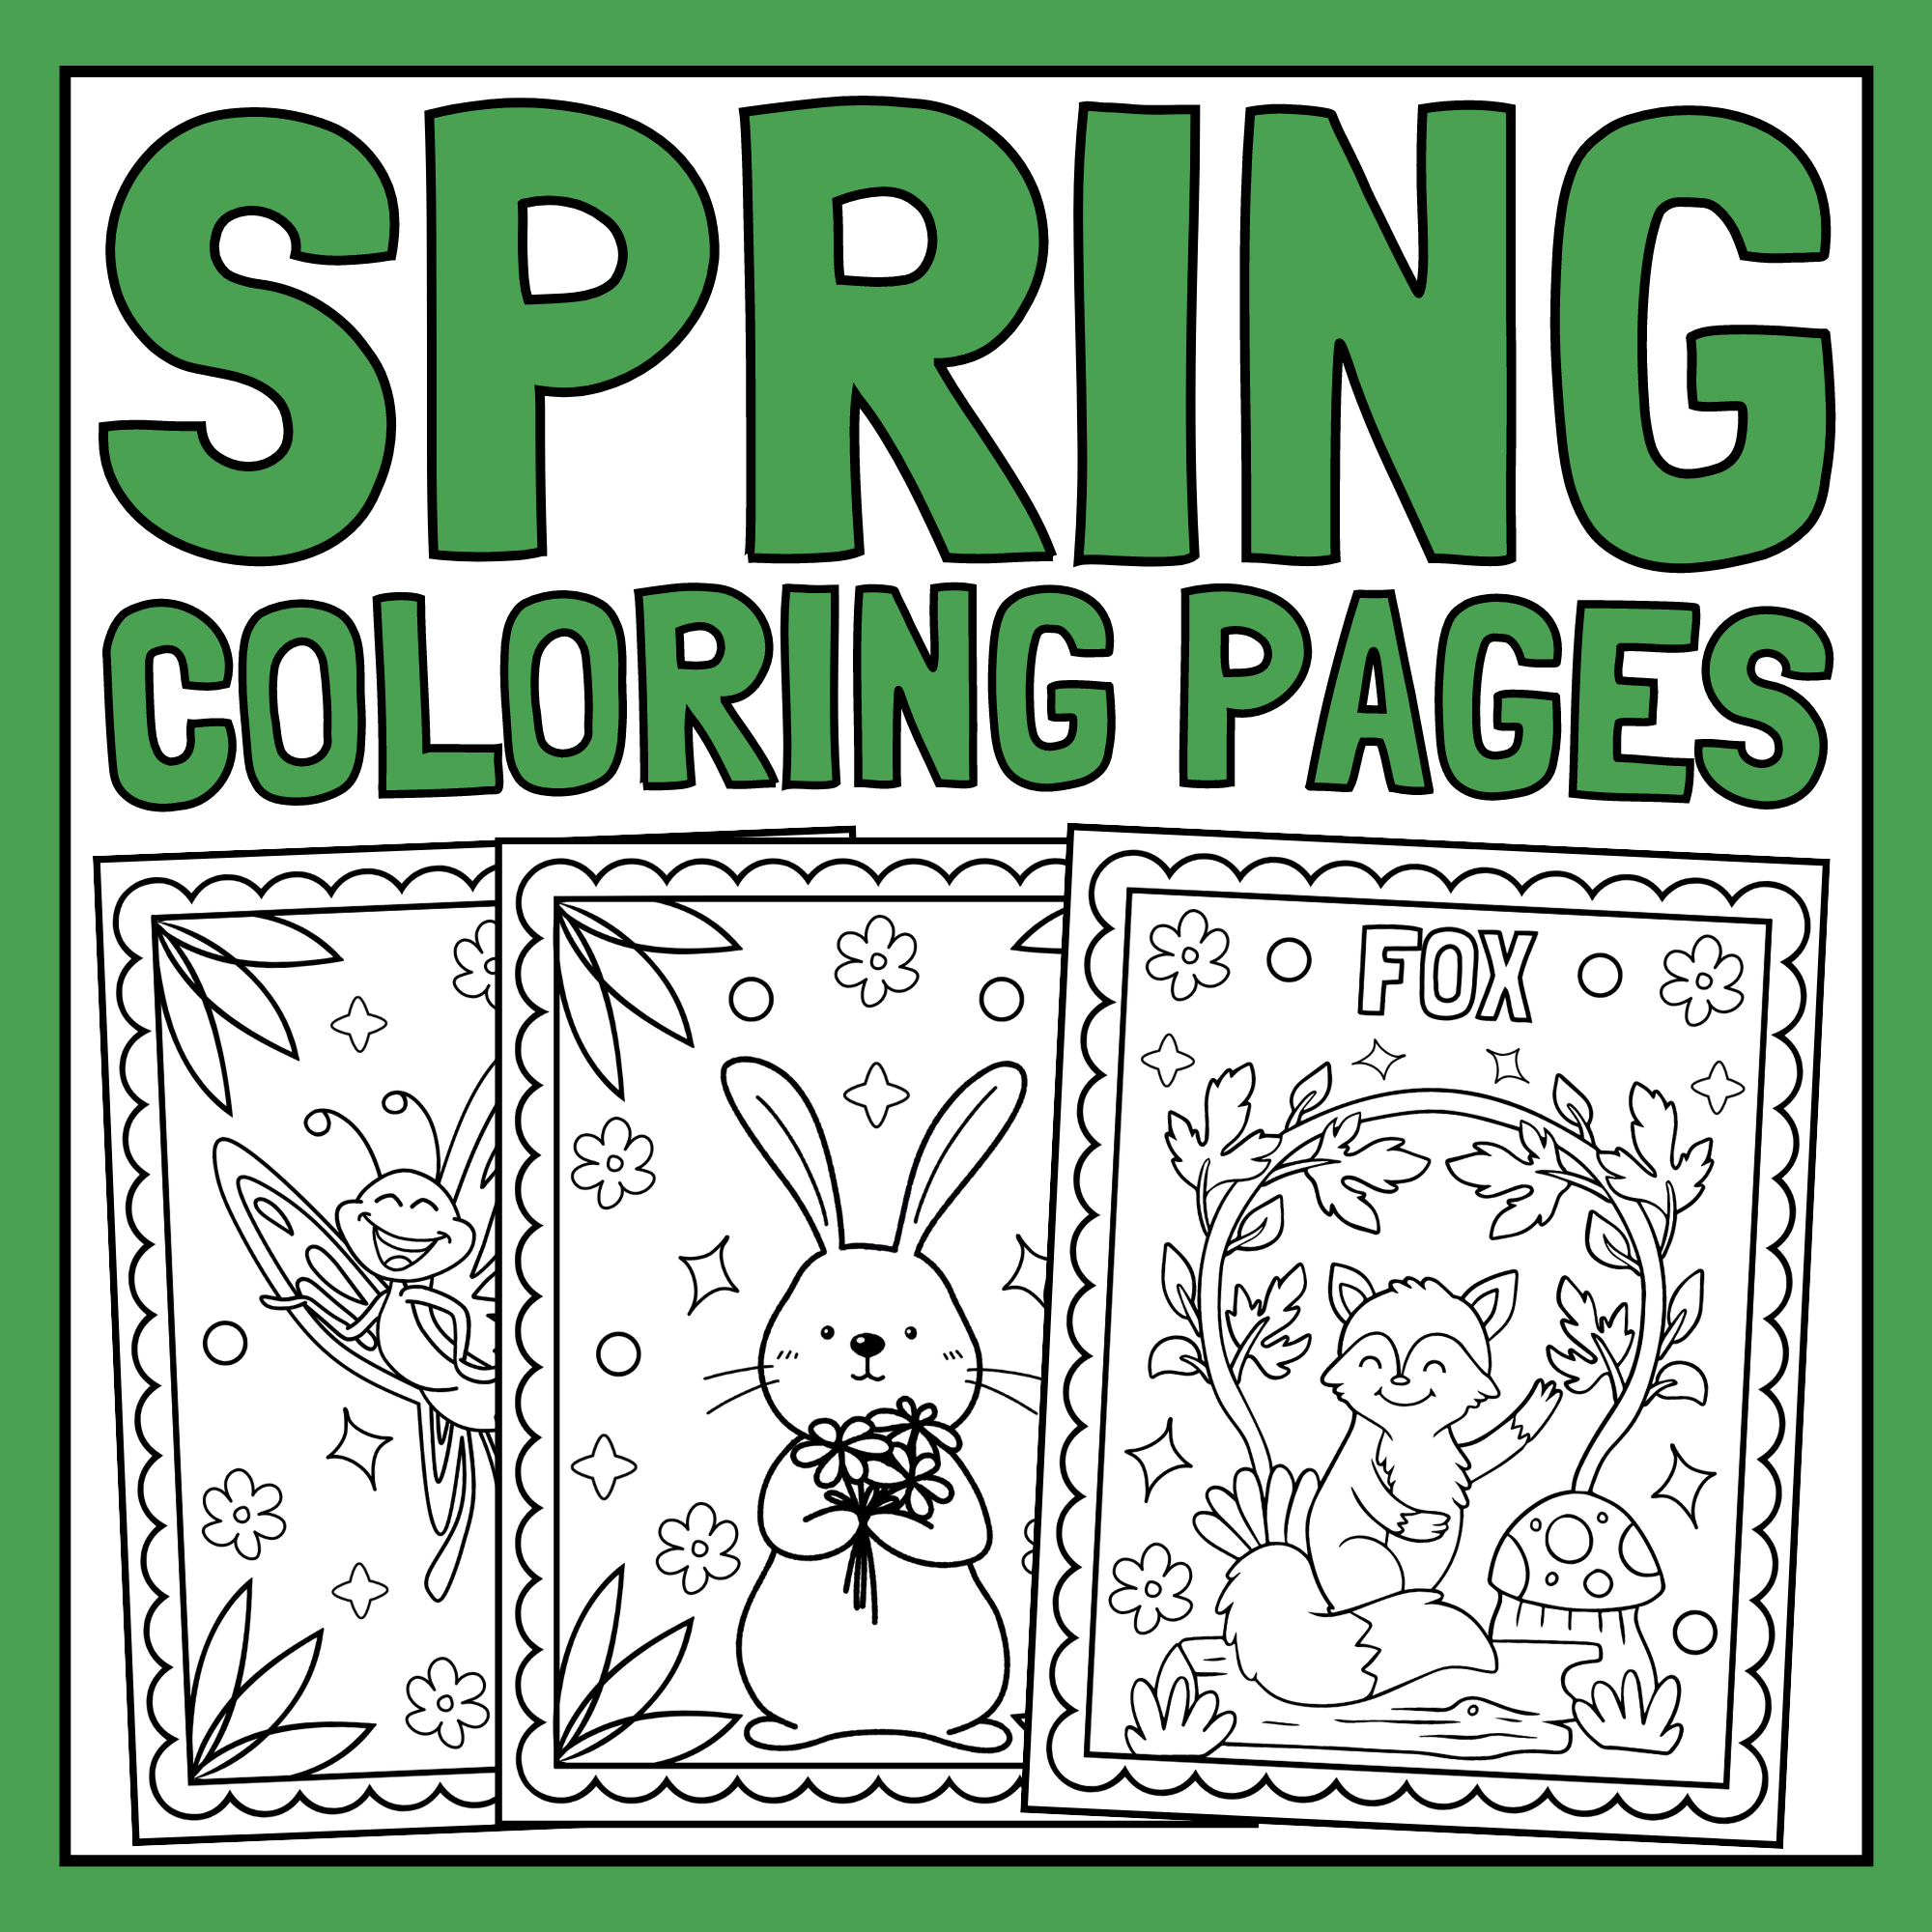 Spring coloring pages bundle spring coloring sheets spring break coloring made by teachers